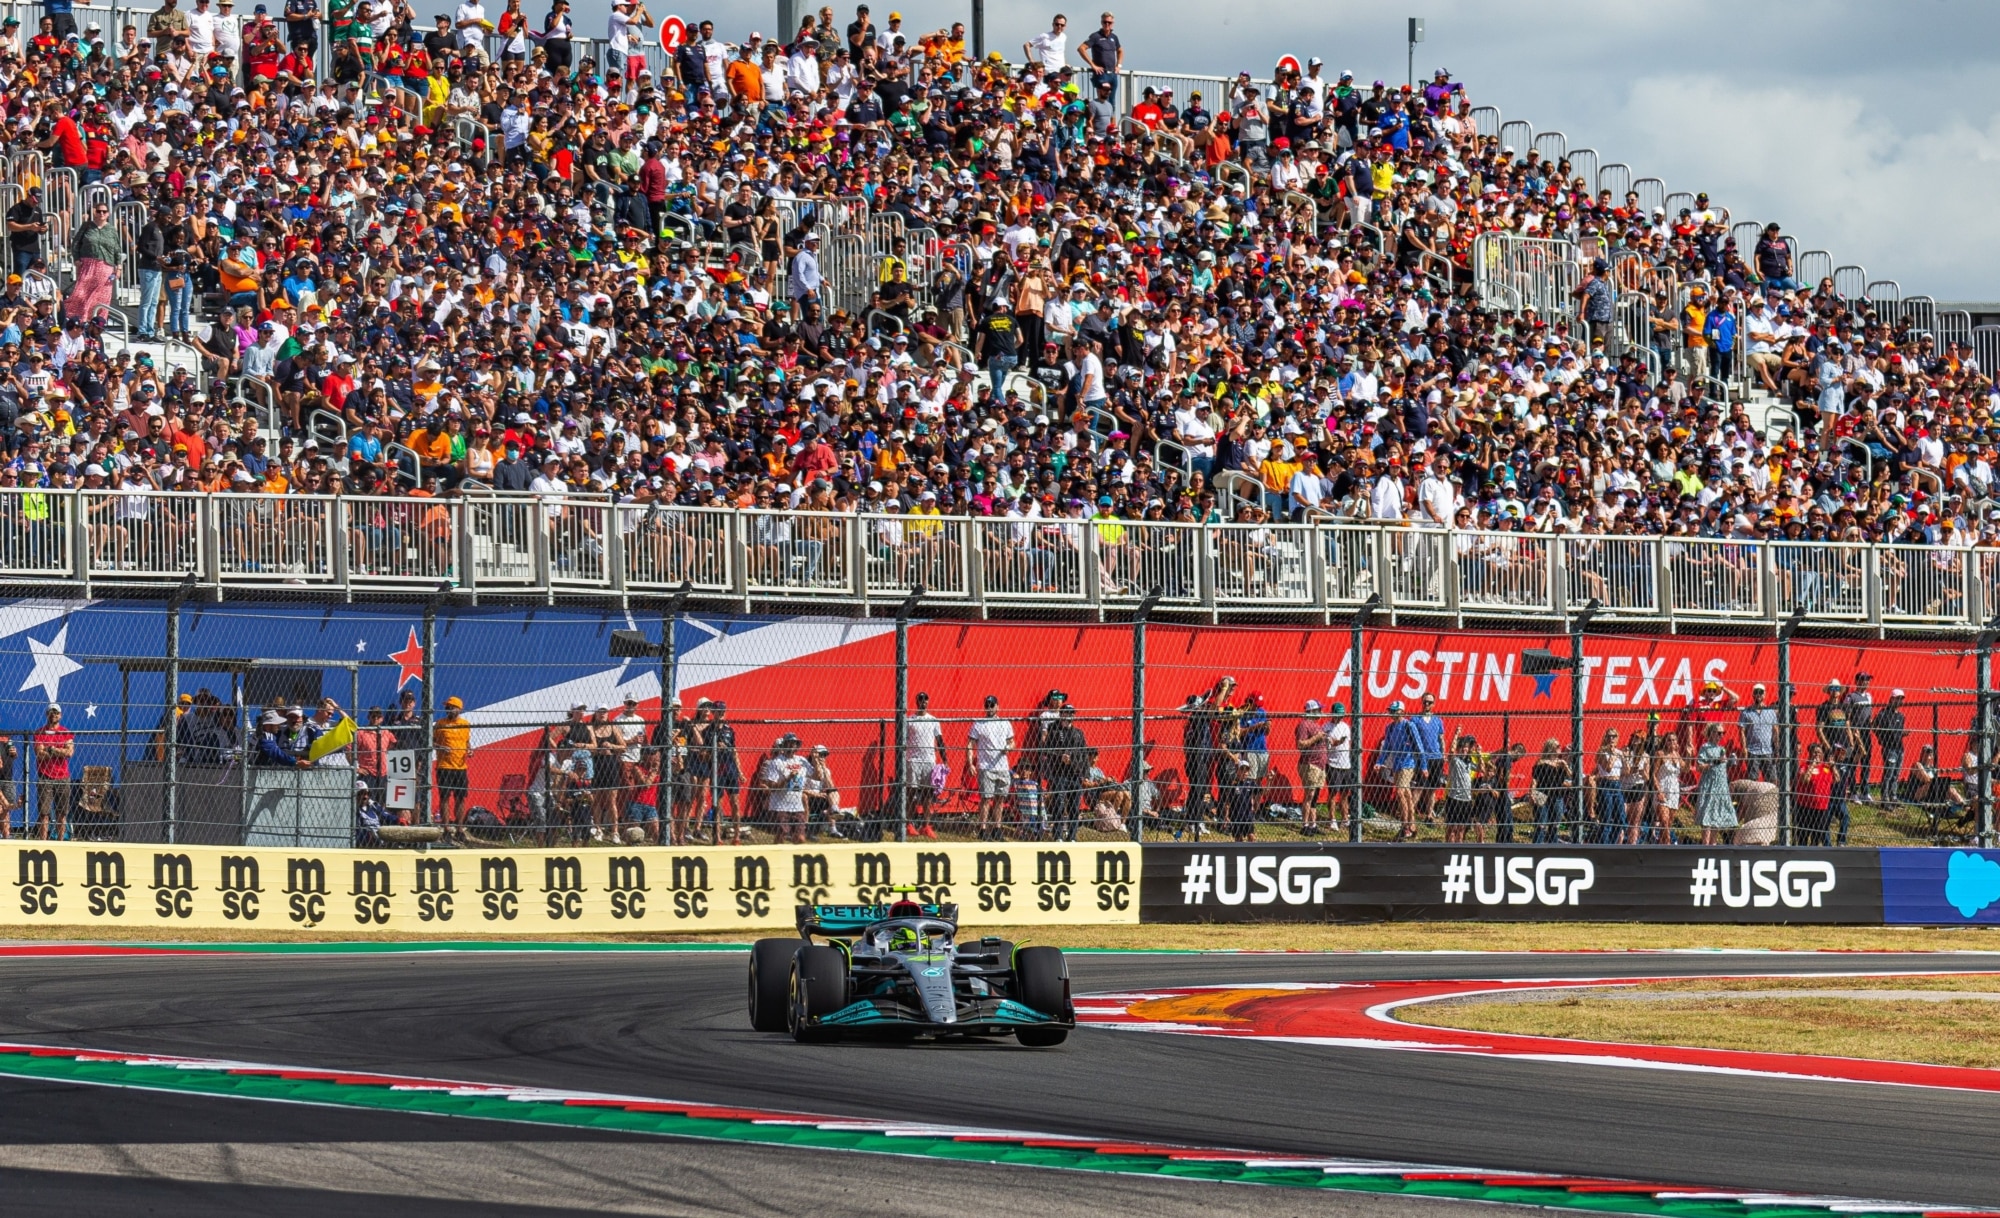 Five Best Formula One Grand Prix Events to attend in 2023